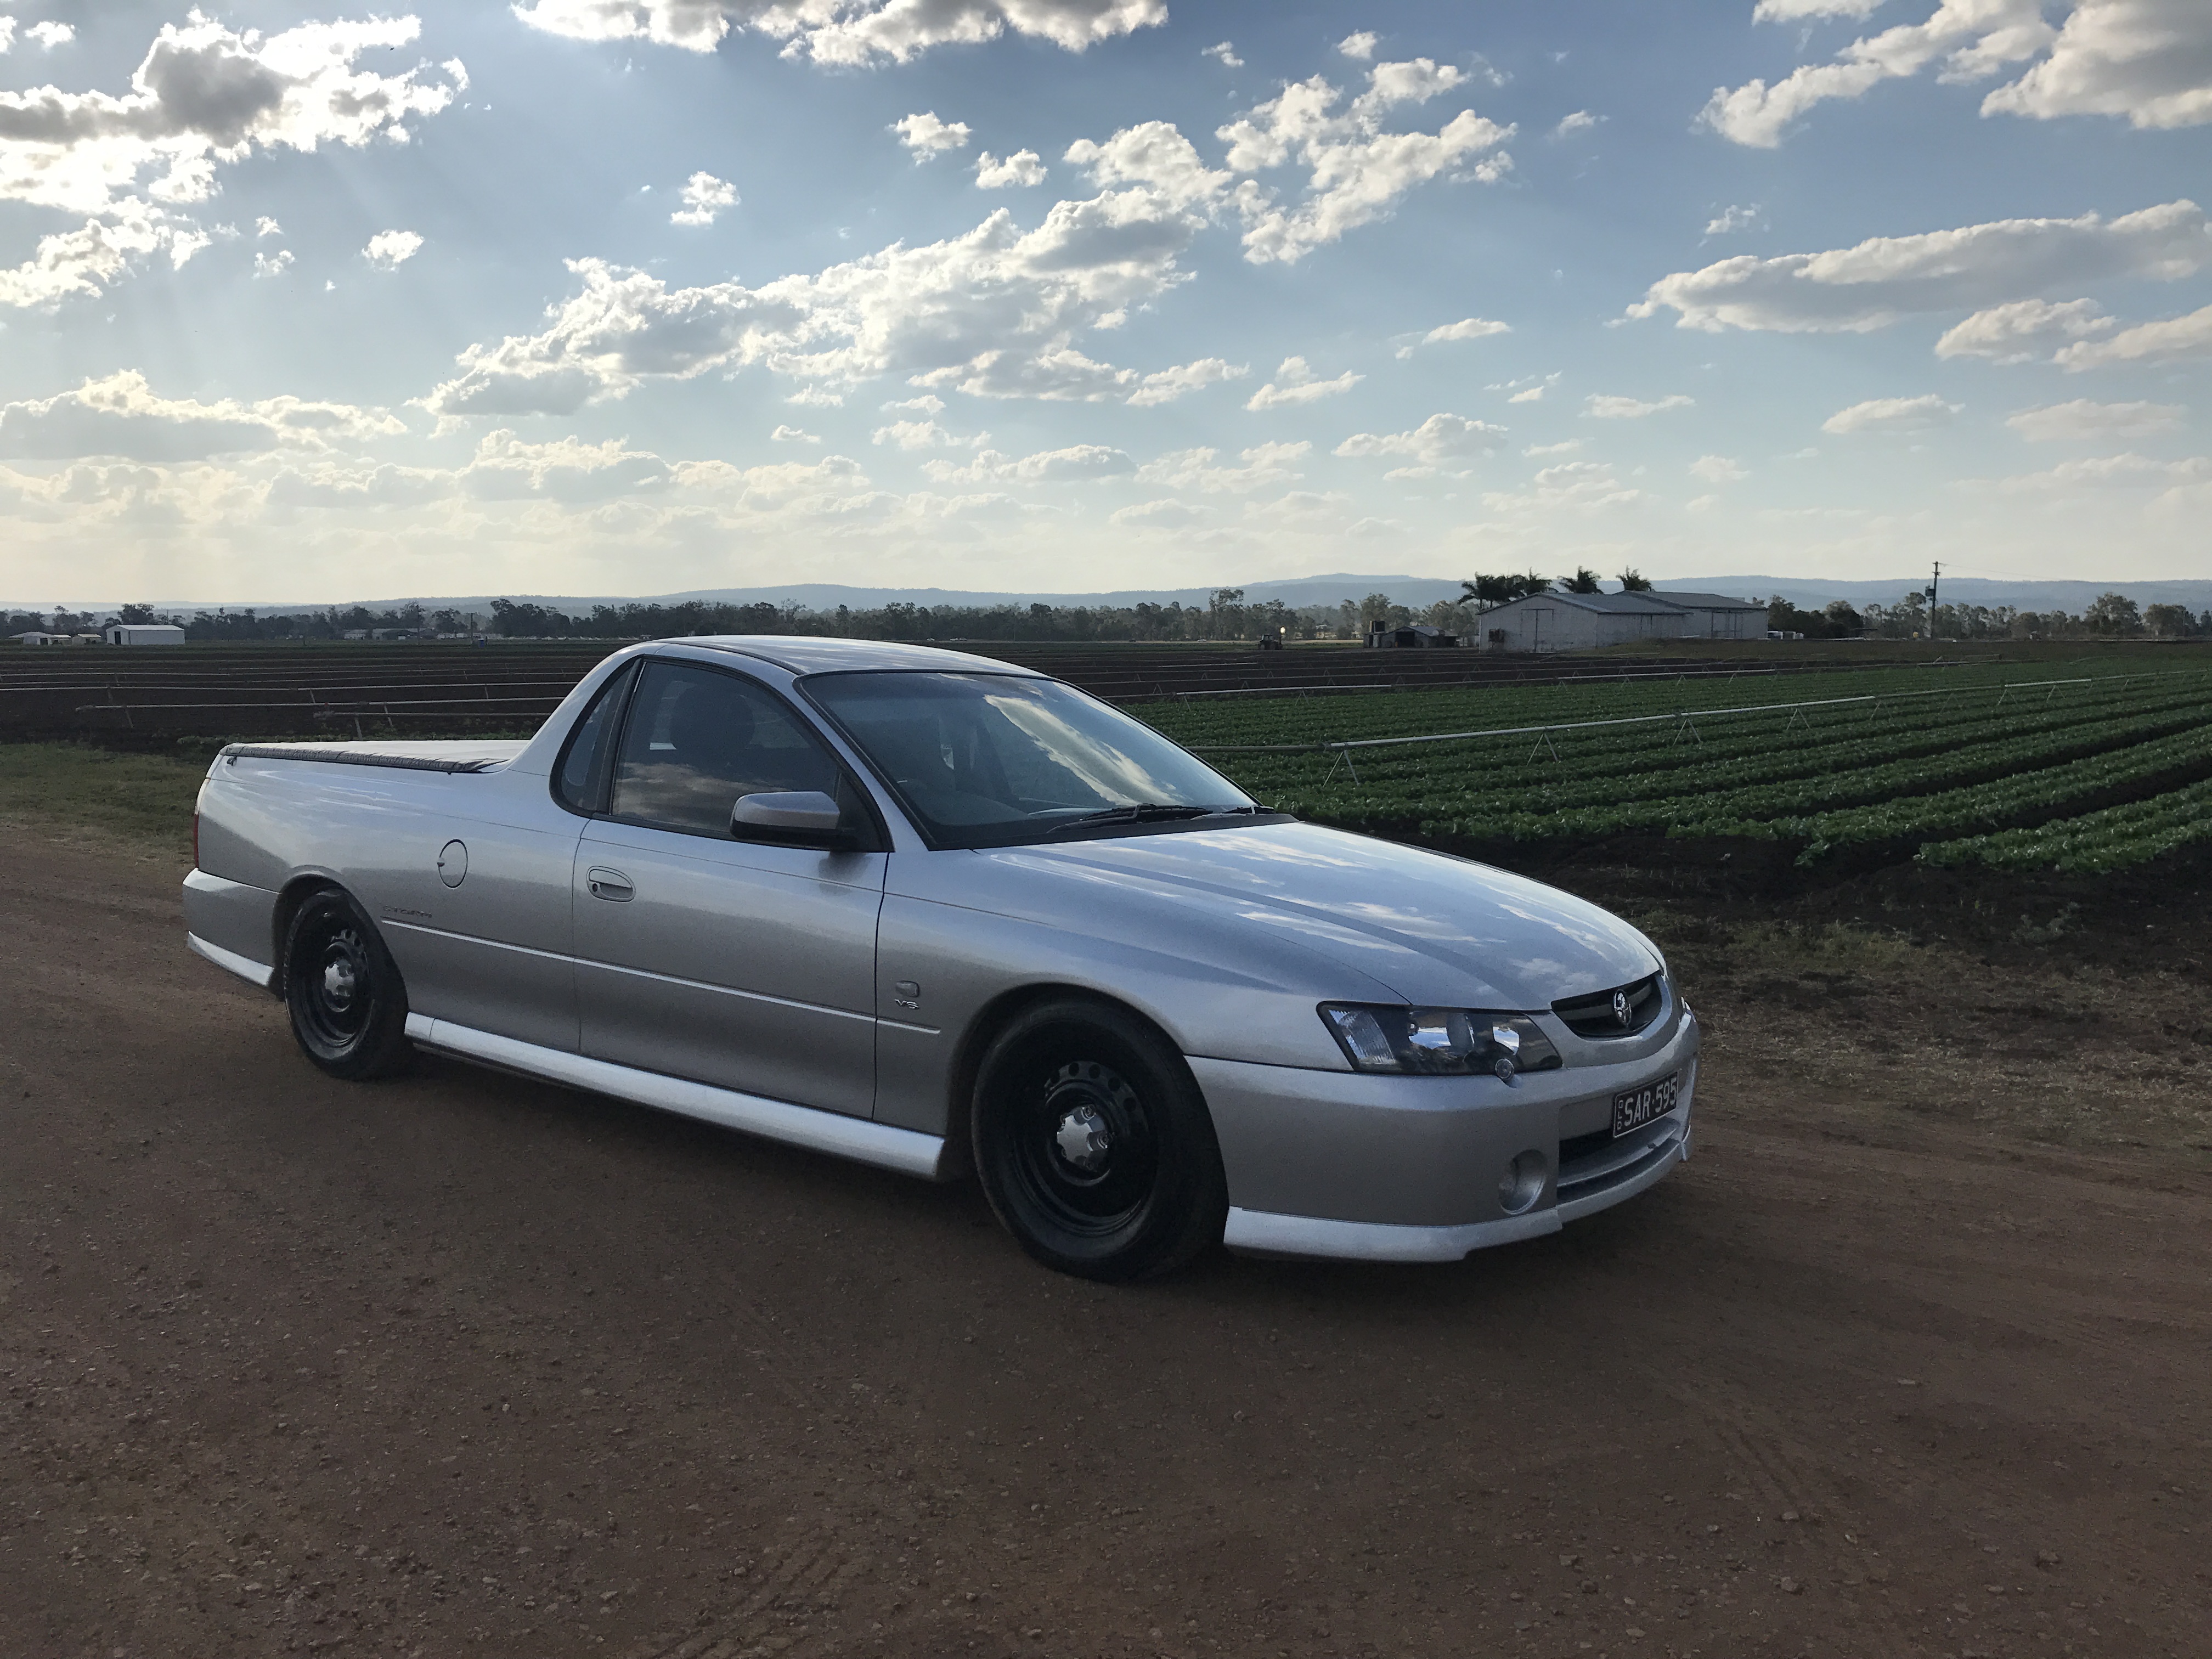 2004 Holden Commodore Storm VYII